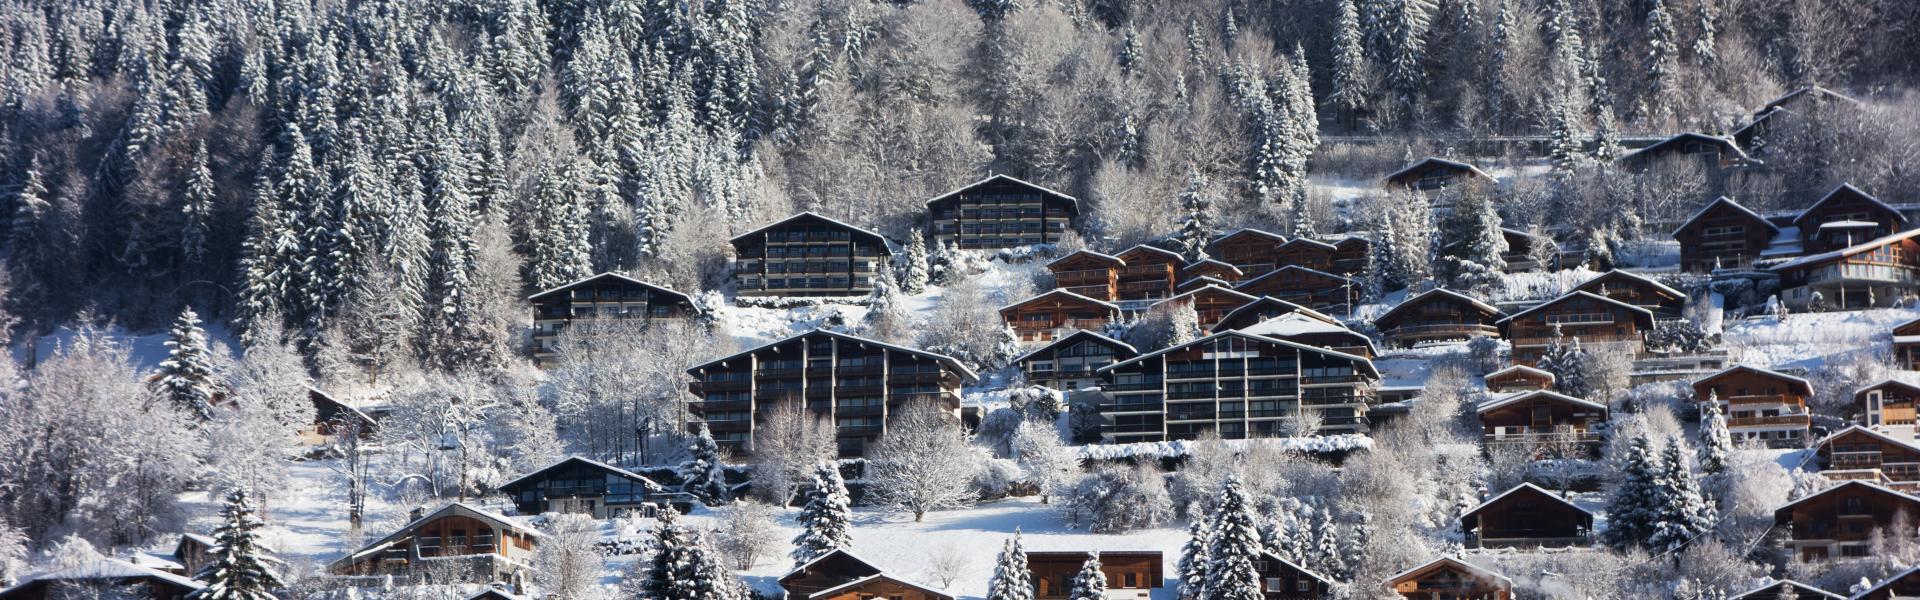 Ski chalets covered in snow on the side of the mountains above Morzine. Snow covered forest behind.